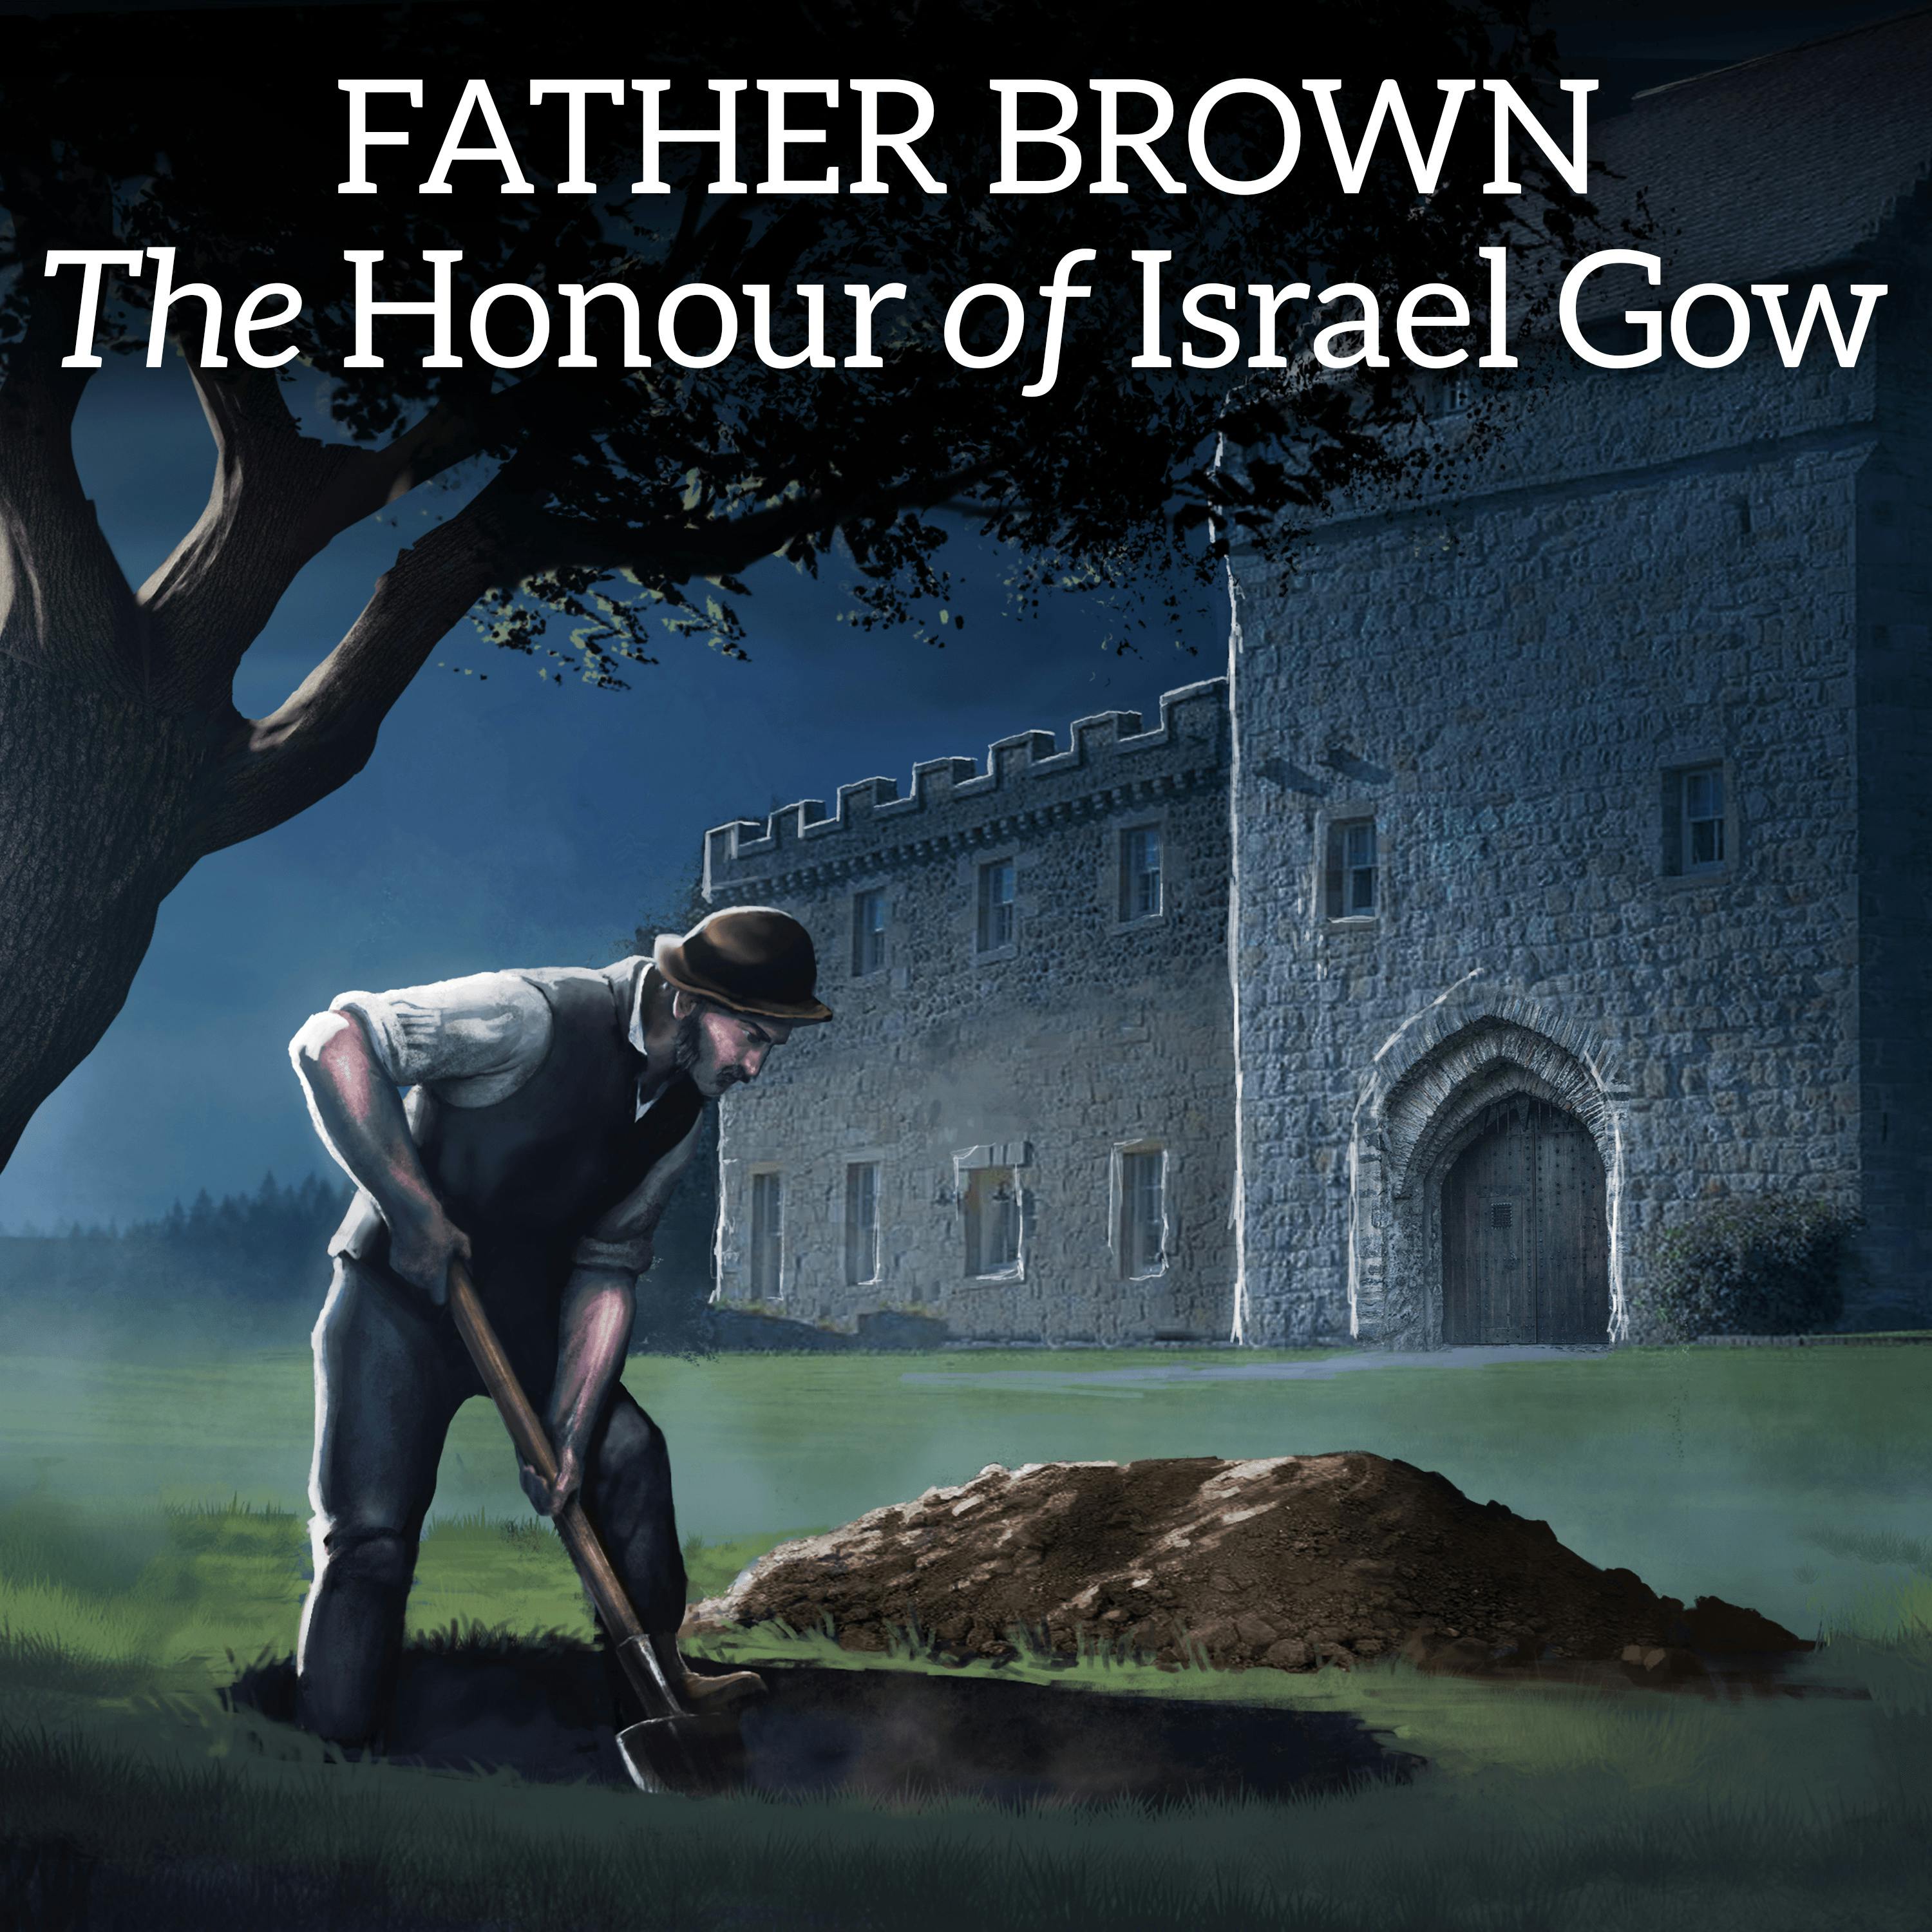 Father Brown and the Innocence of Israel Gow - G. K. Chesterton